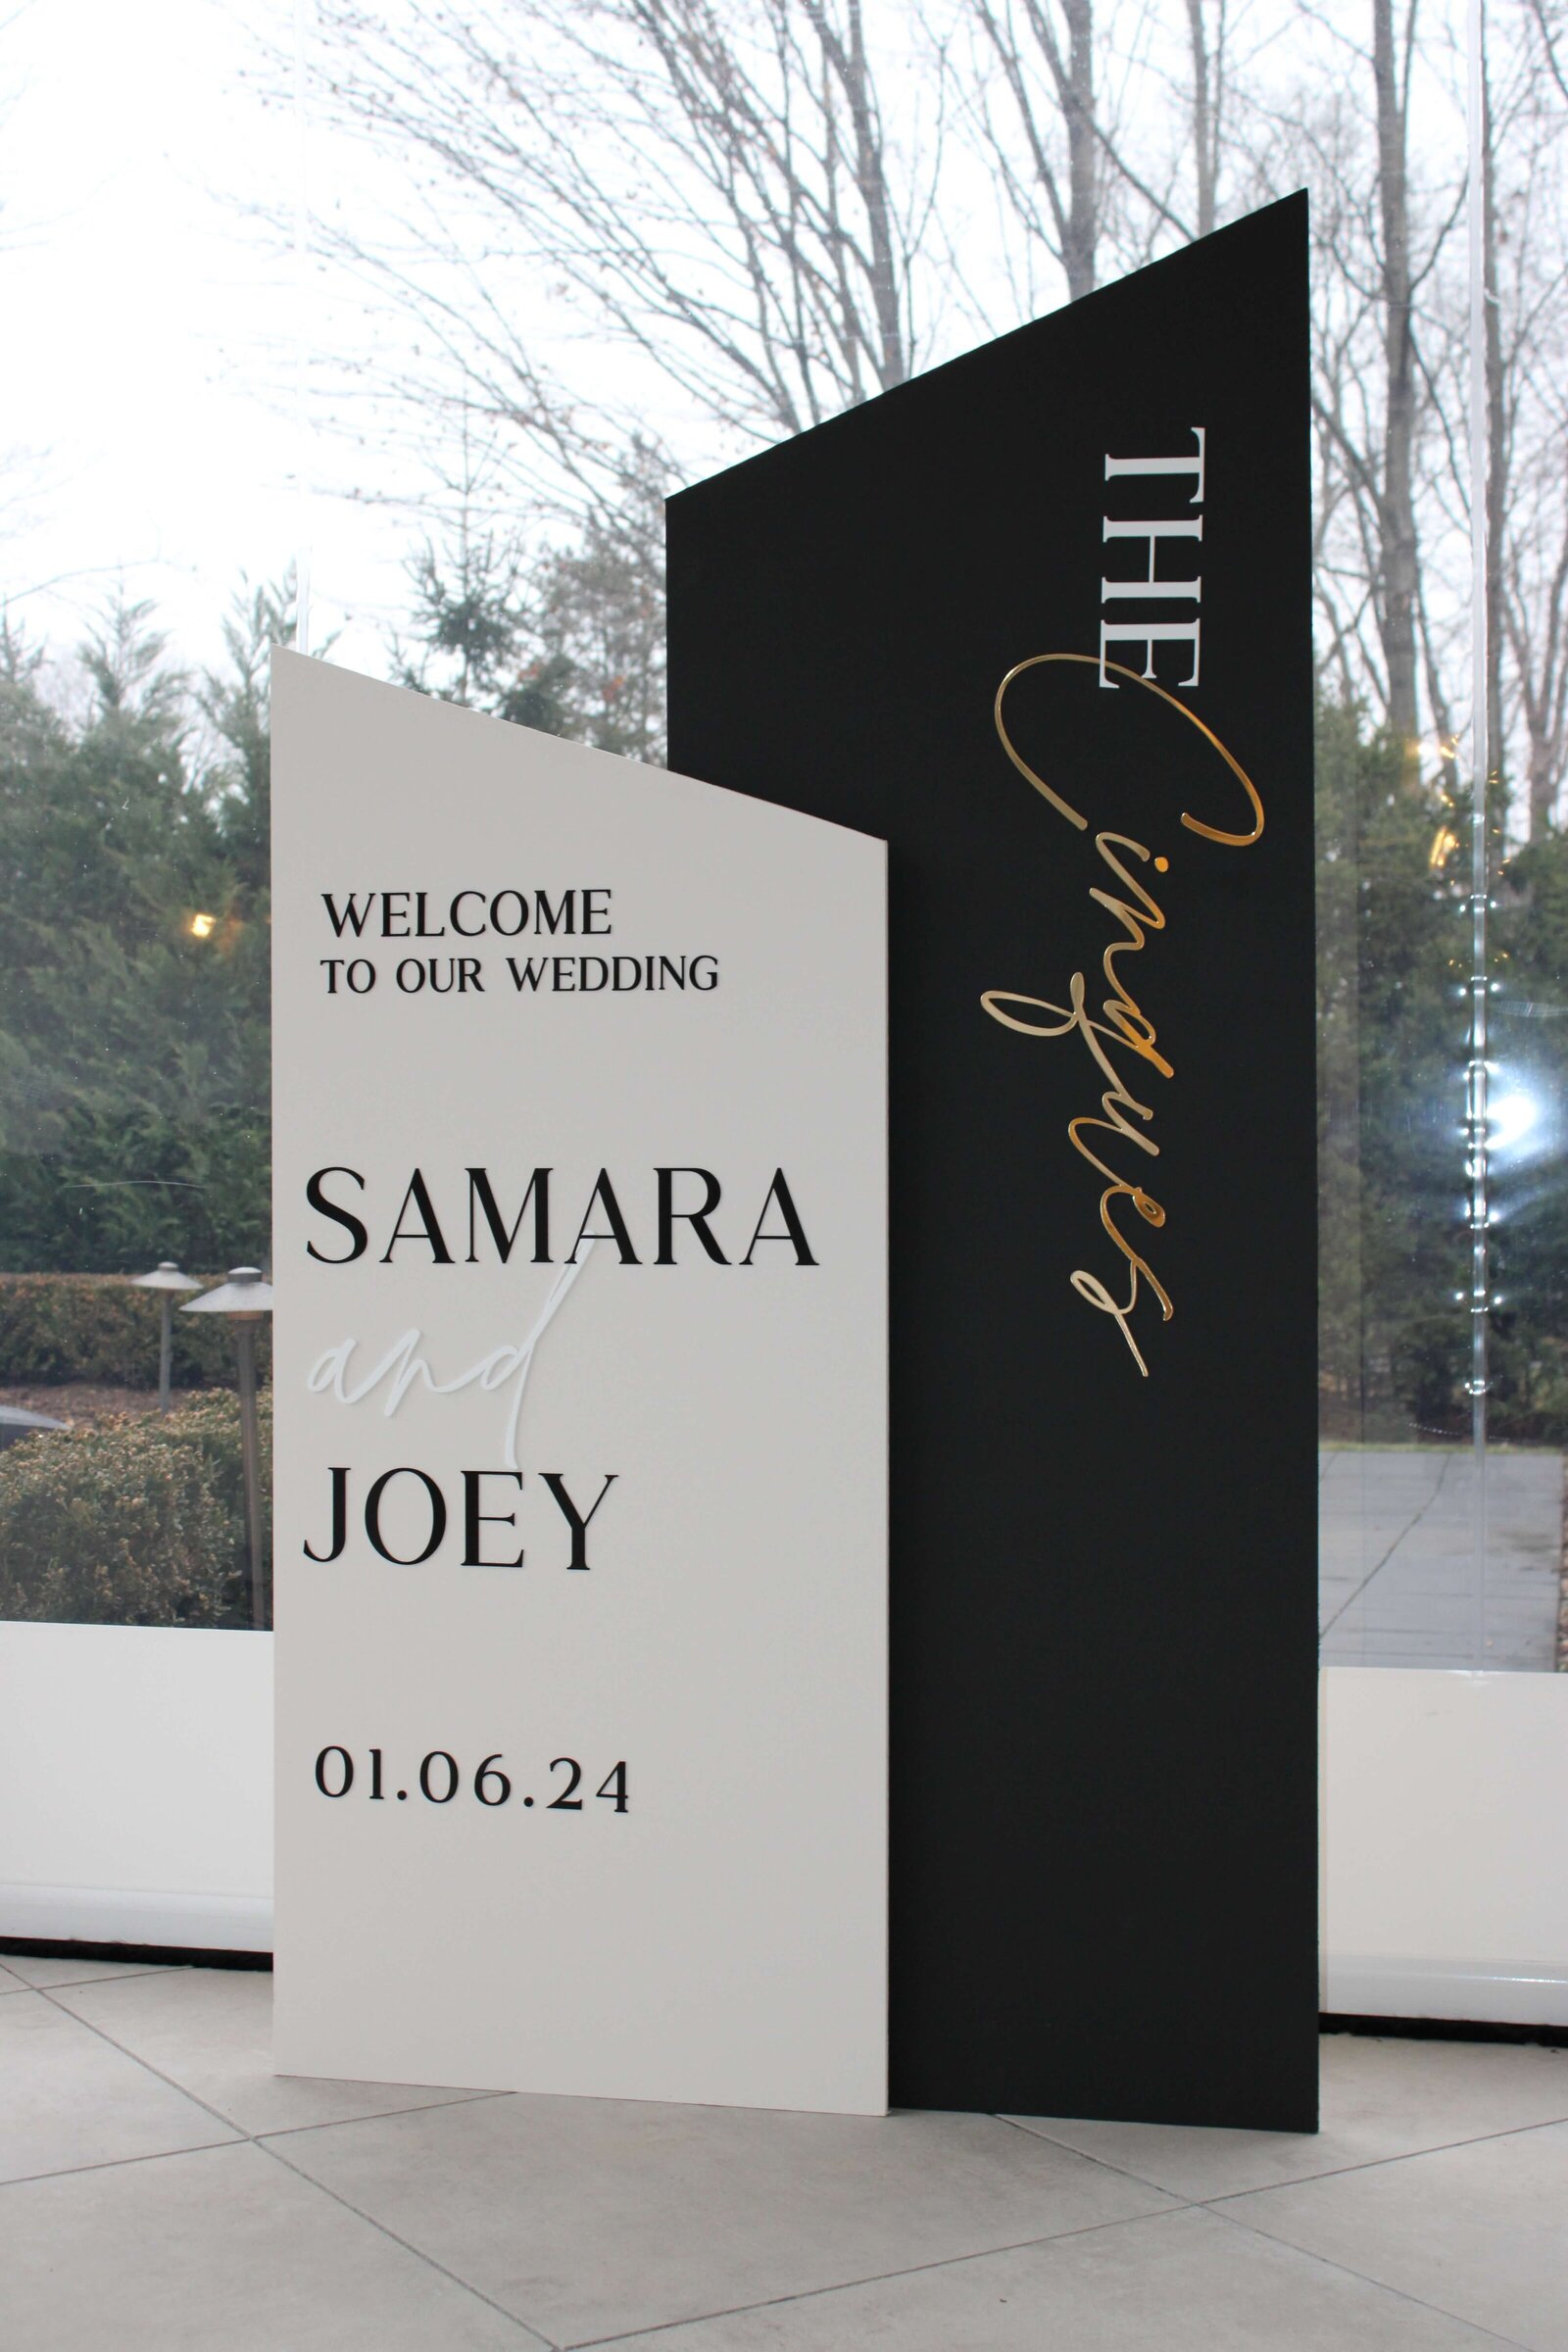 SGH Creative Luxury Wedding Signage & Stationery in New York & New Jersey - Full Gallery (91)